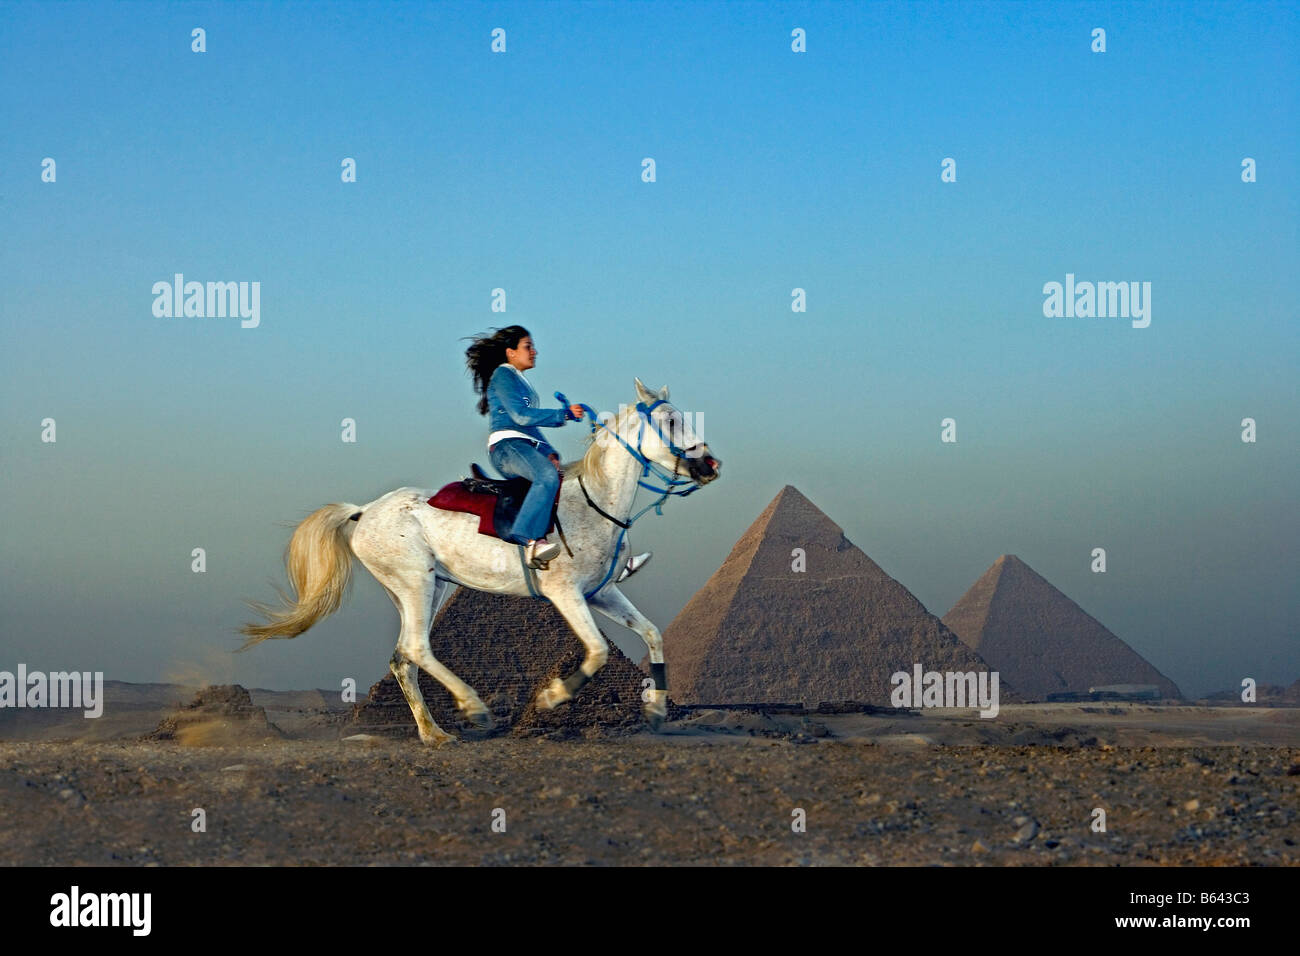 Egypt, Cairo, Giza, Local woman riding horse in front of the pyramids of Giza / Gizeh. Stock Photo